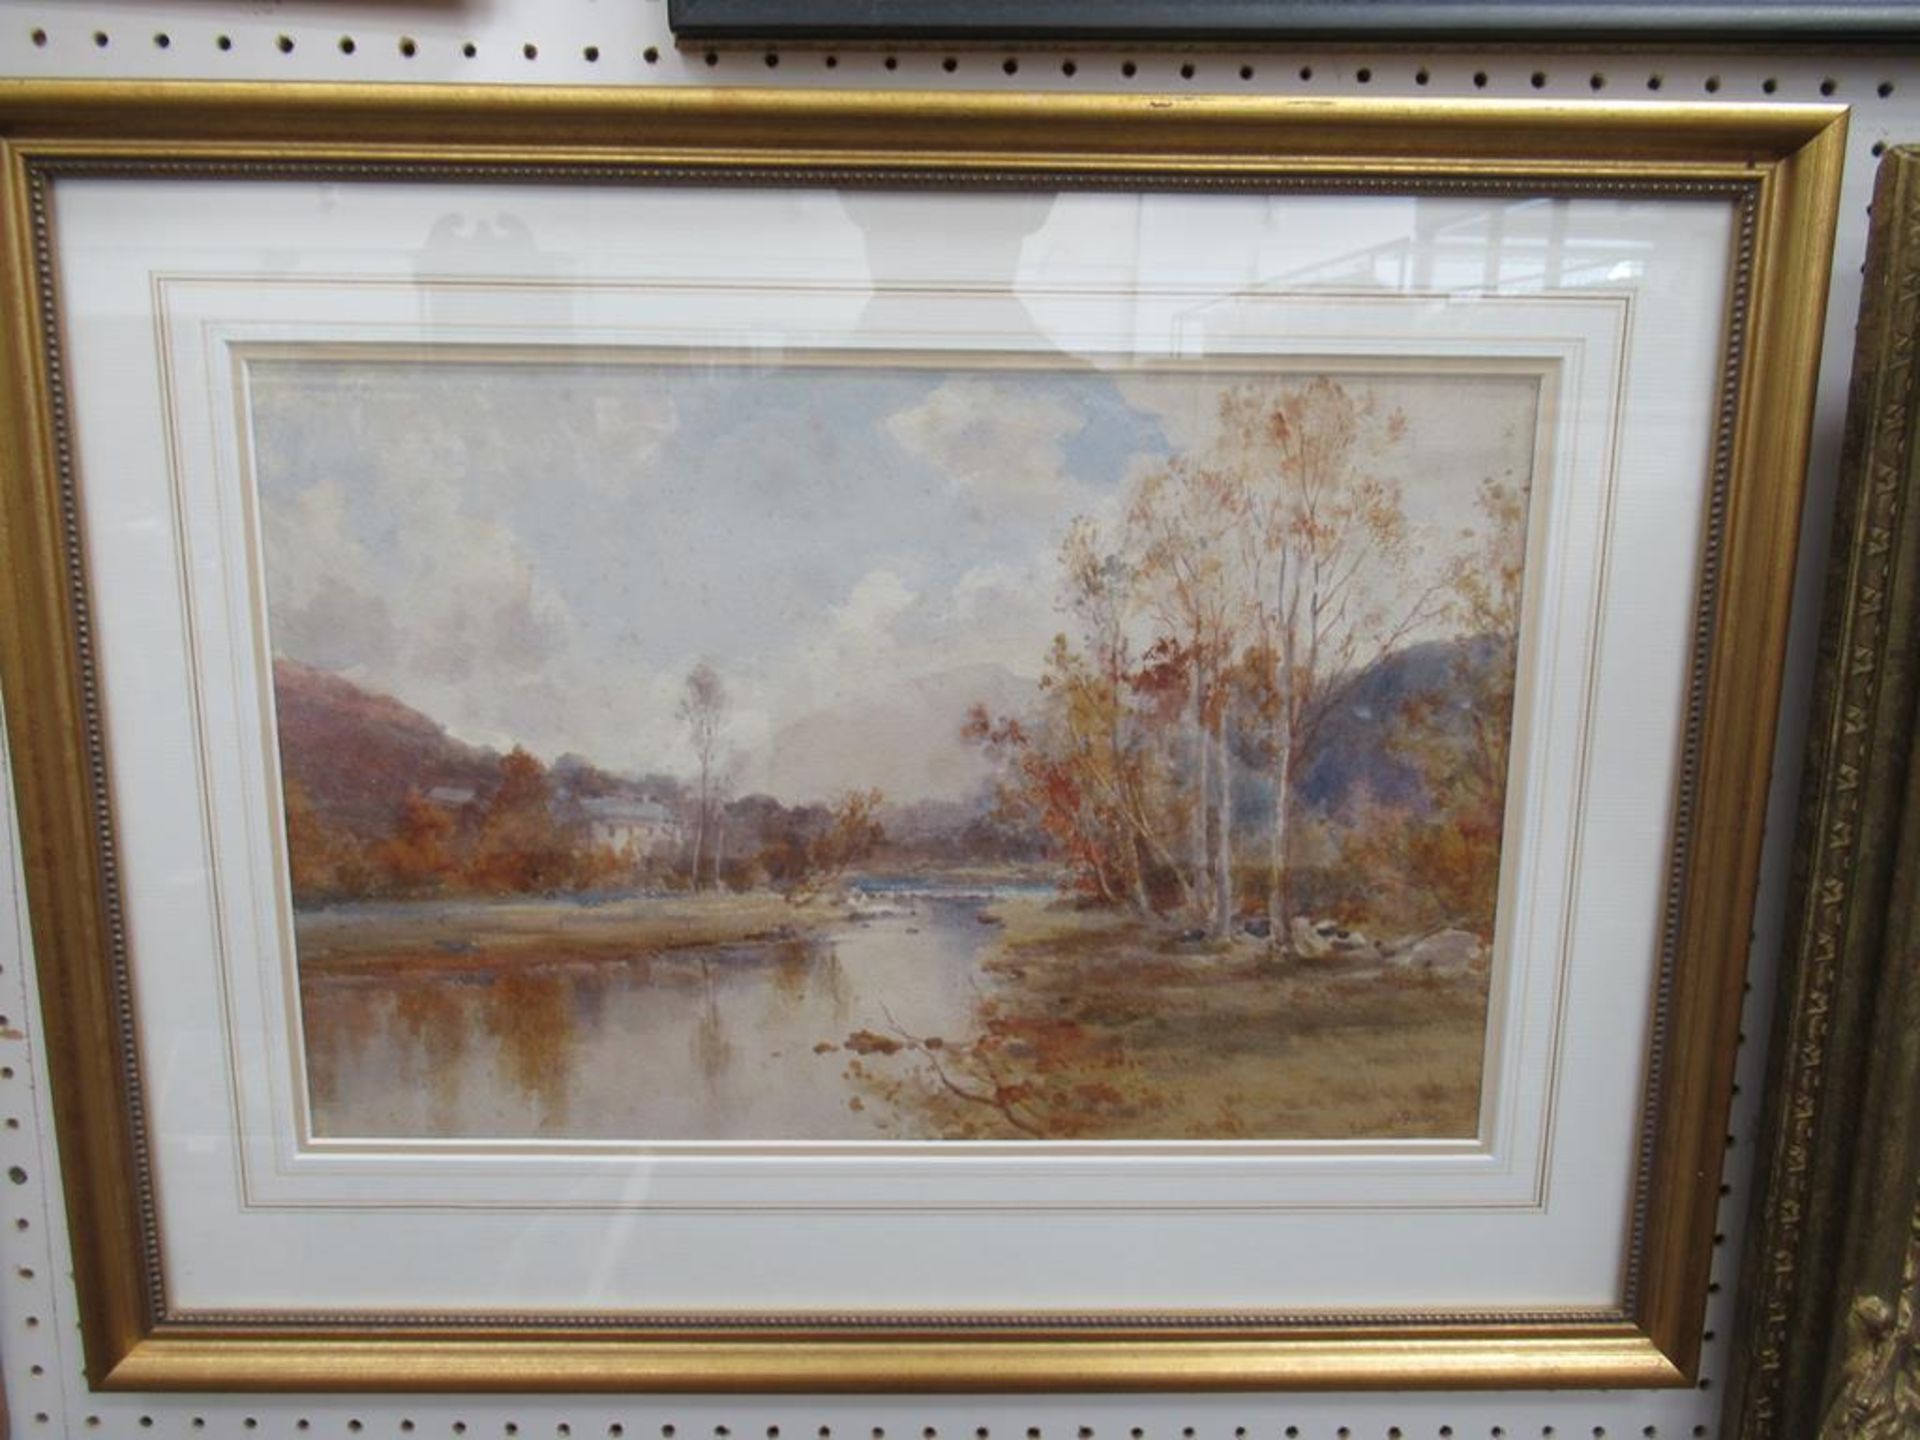 Water Colour of Woodland on Lake signed Edward Arden in Frame (40cm x 26cm)